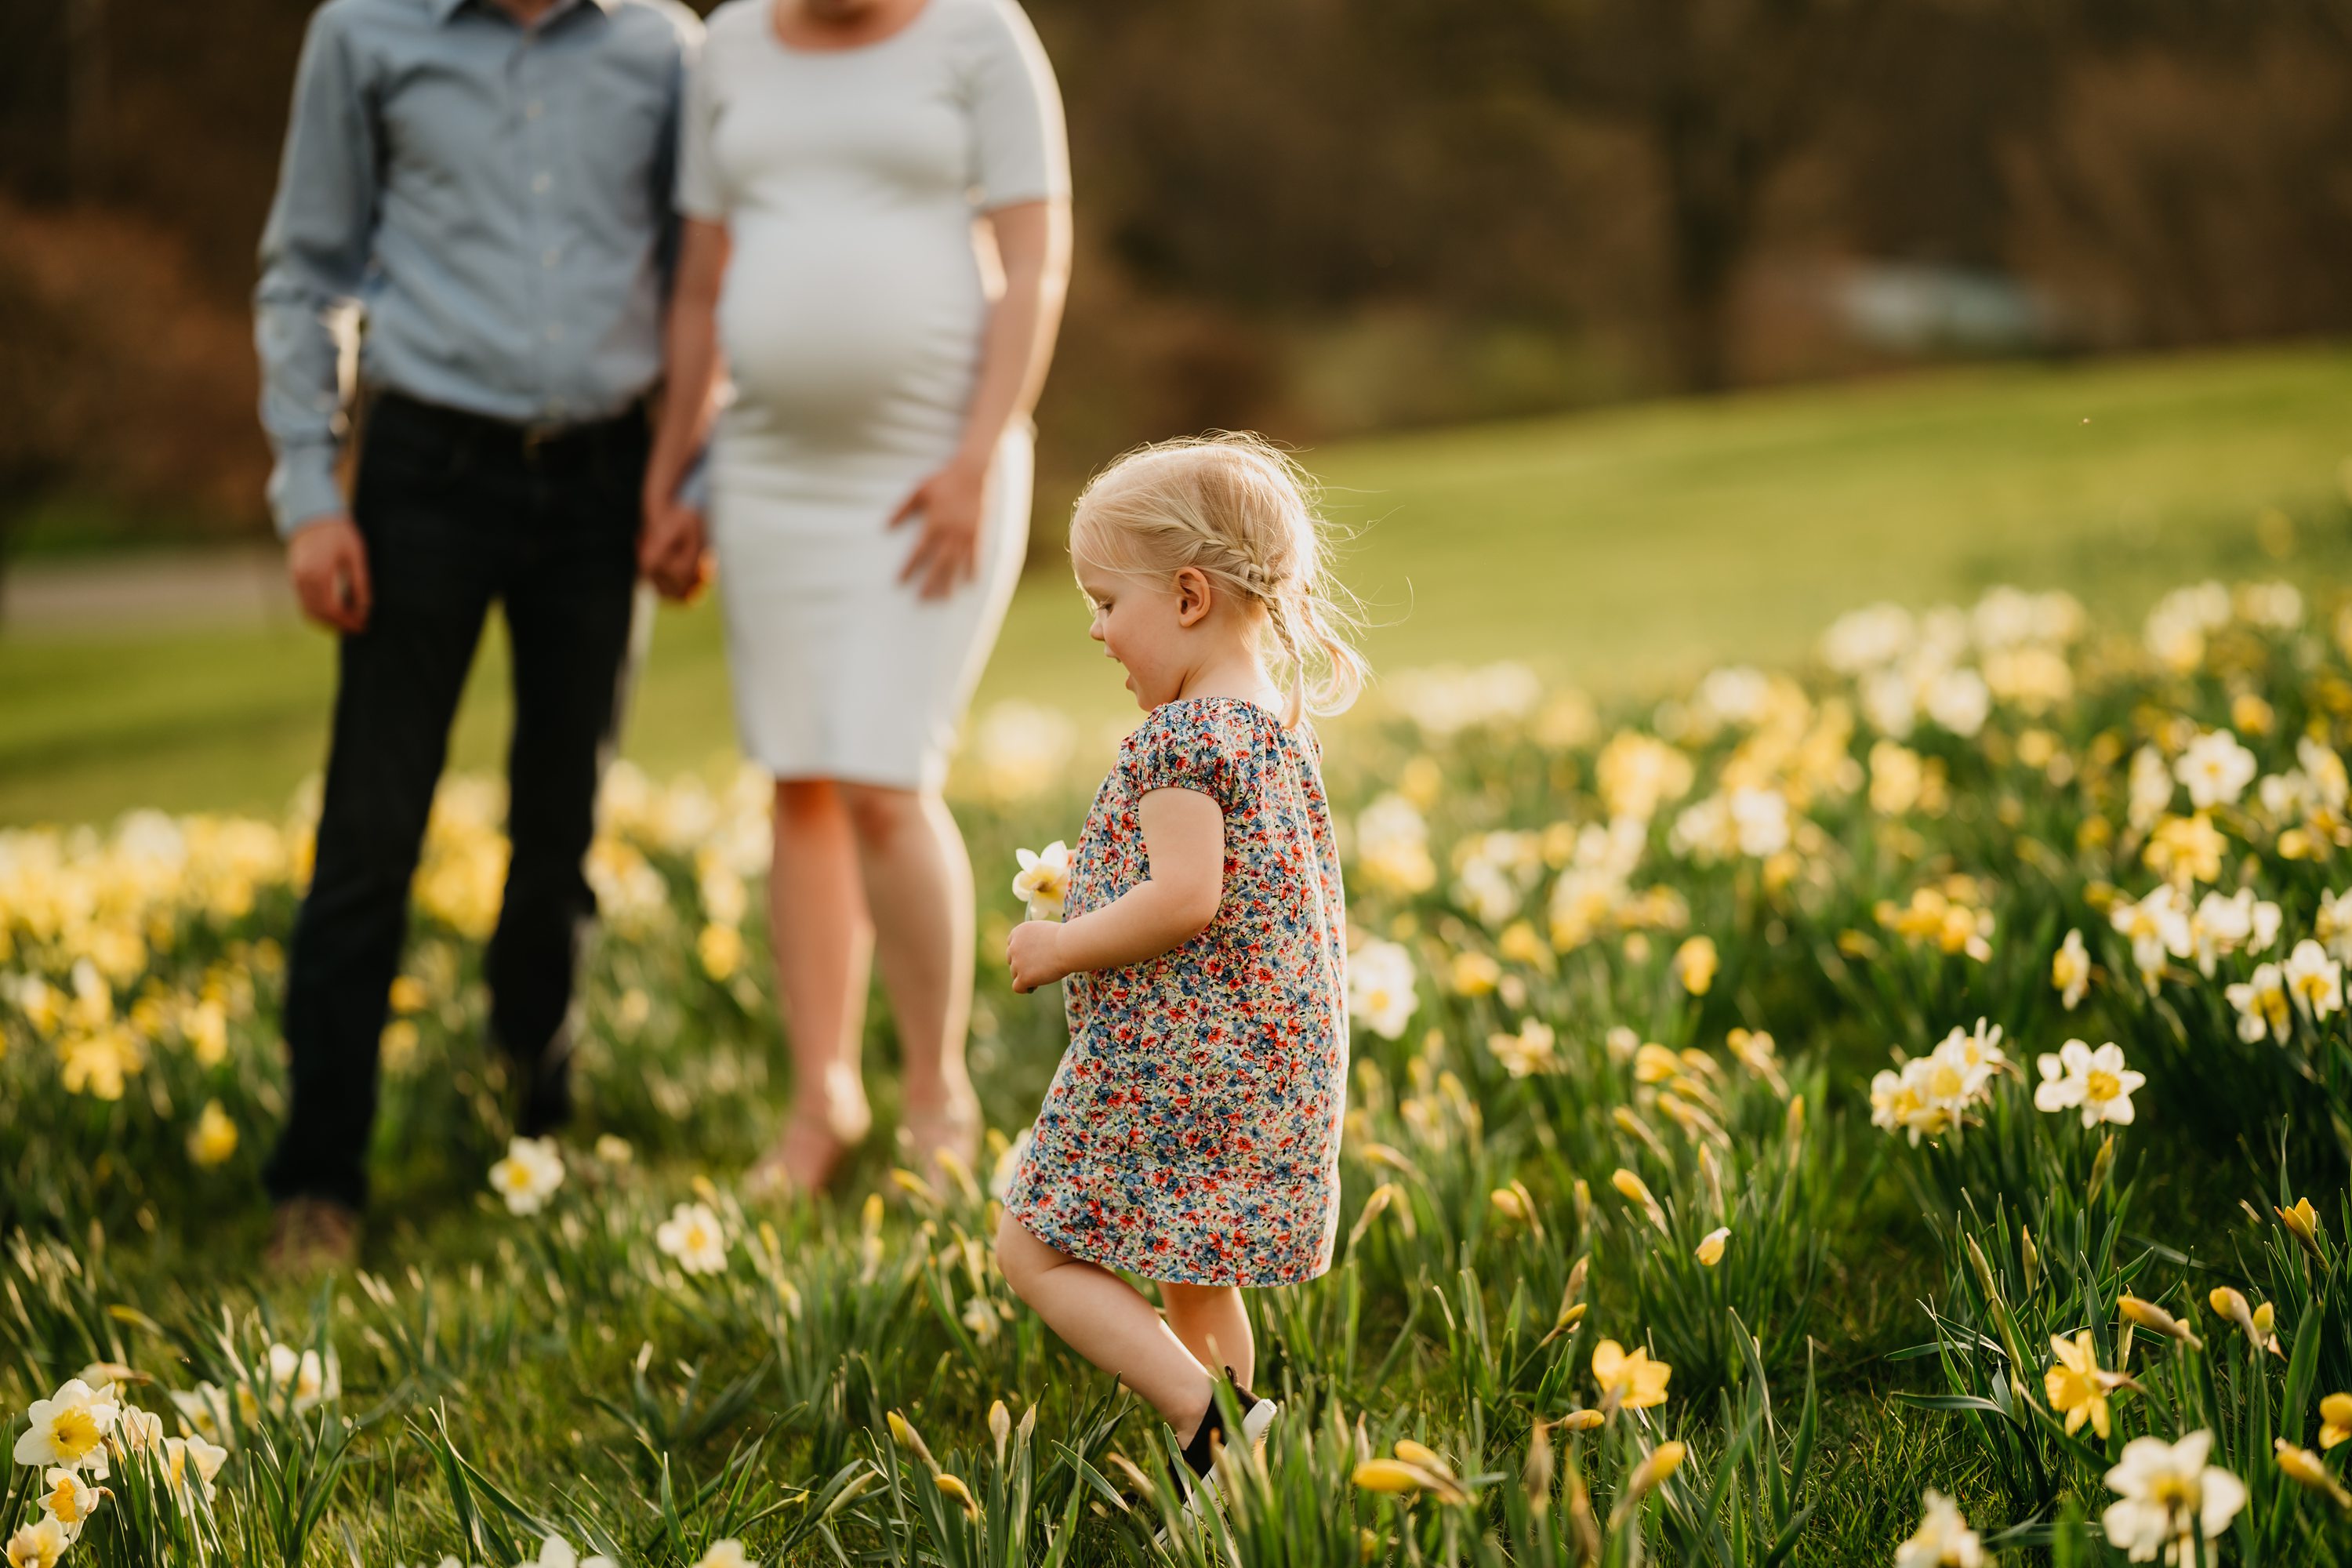 Springtime + Playtime: 3 tips for a maternity session with a toddler